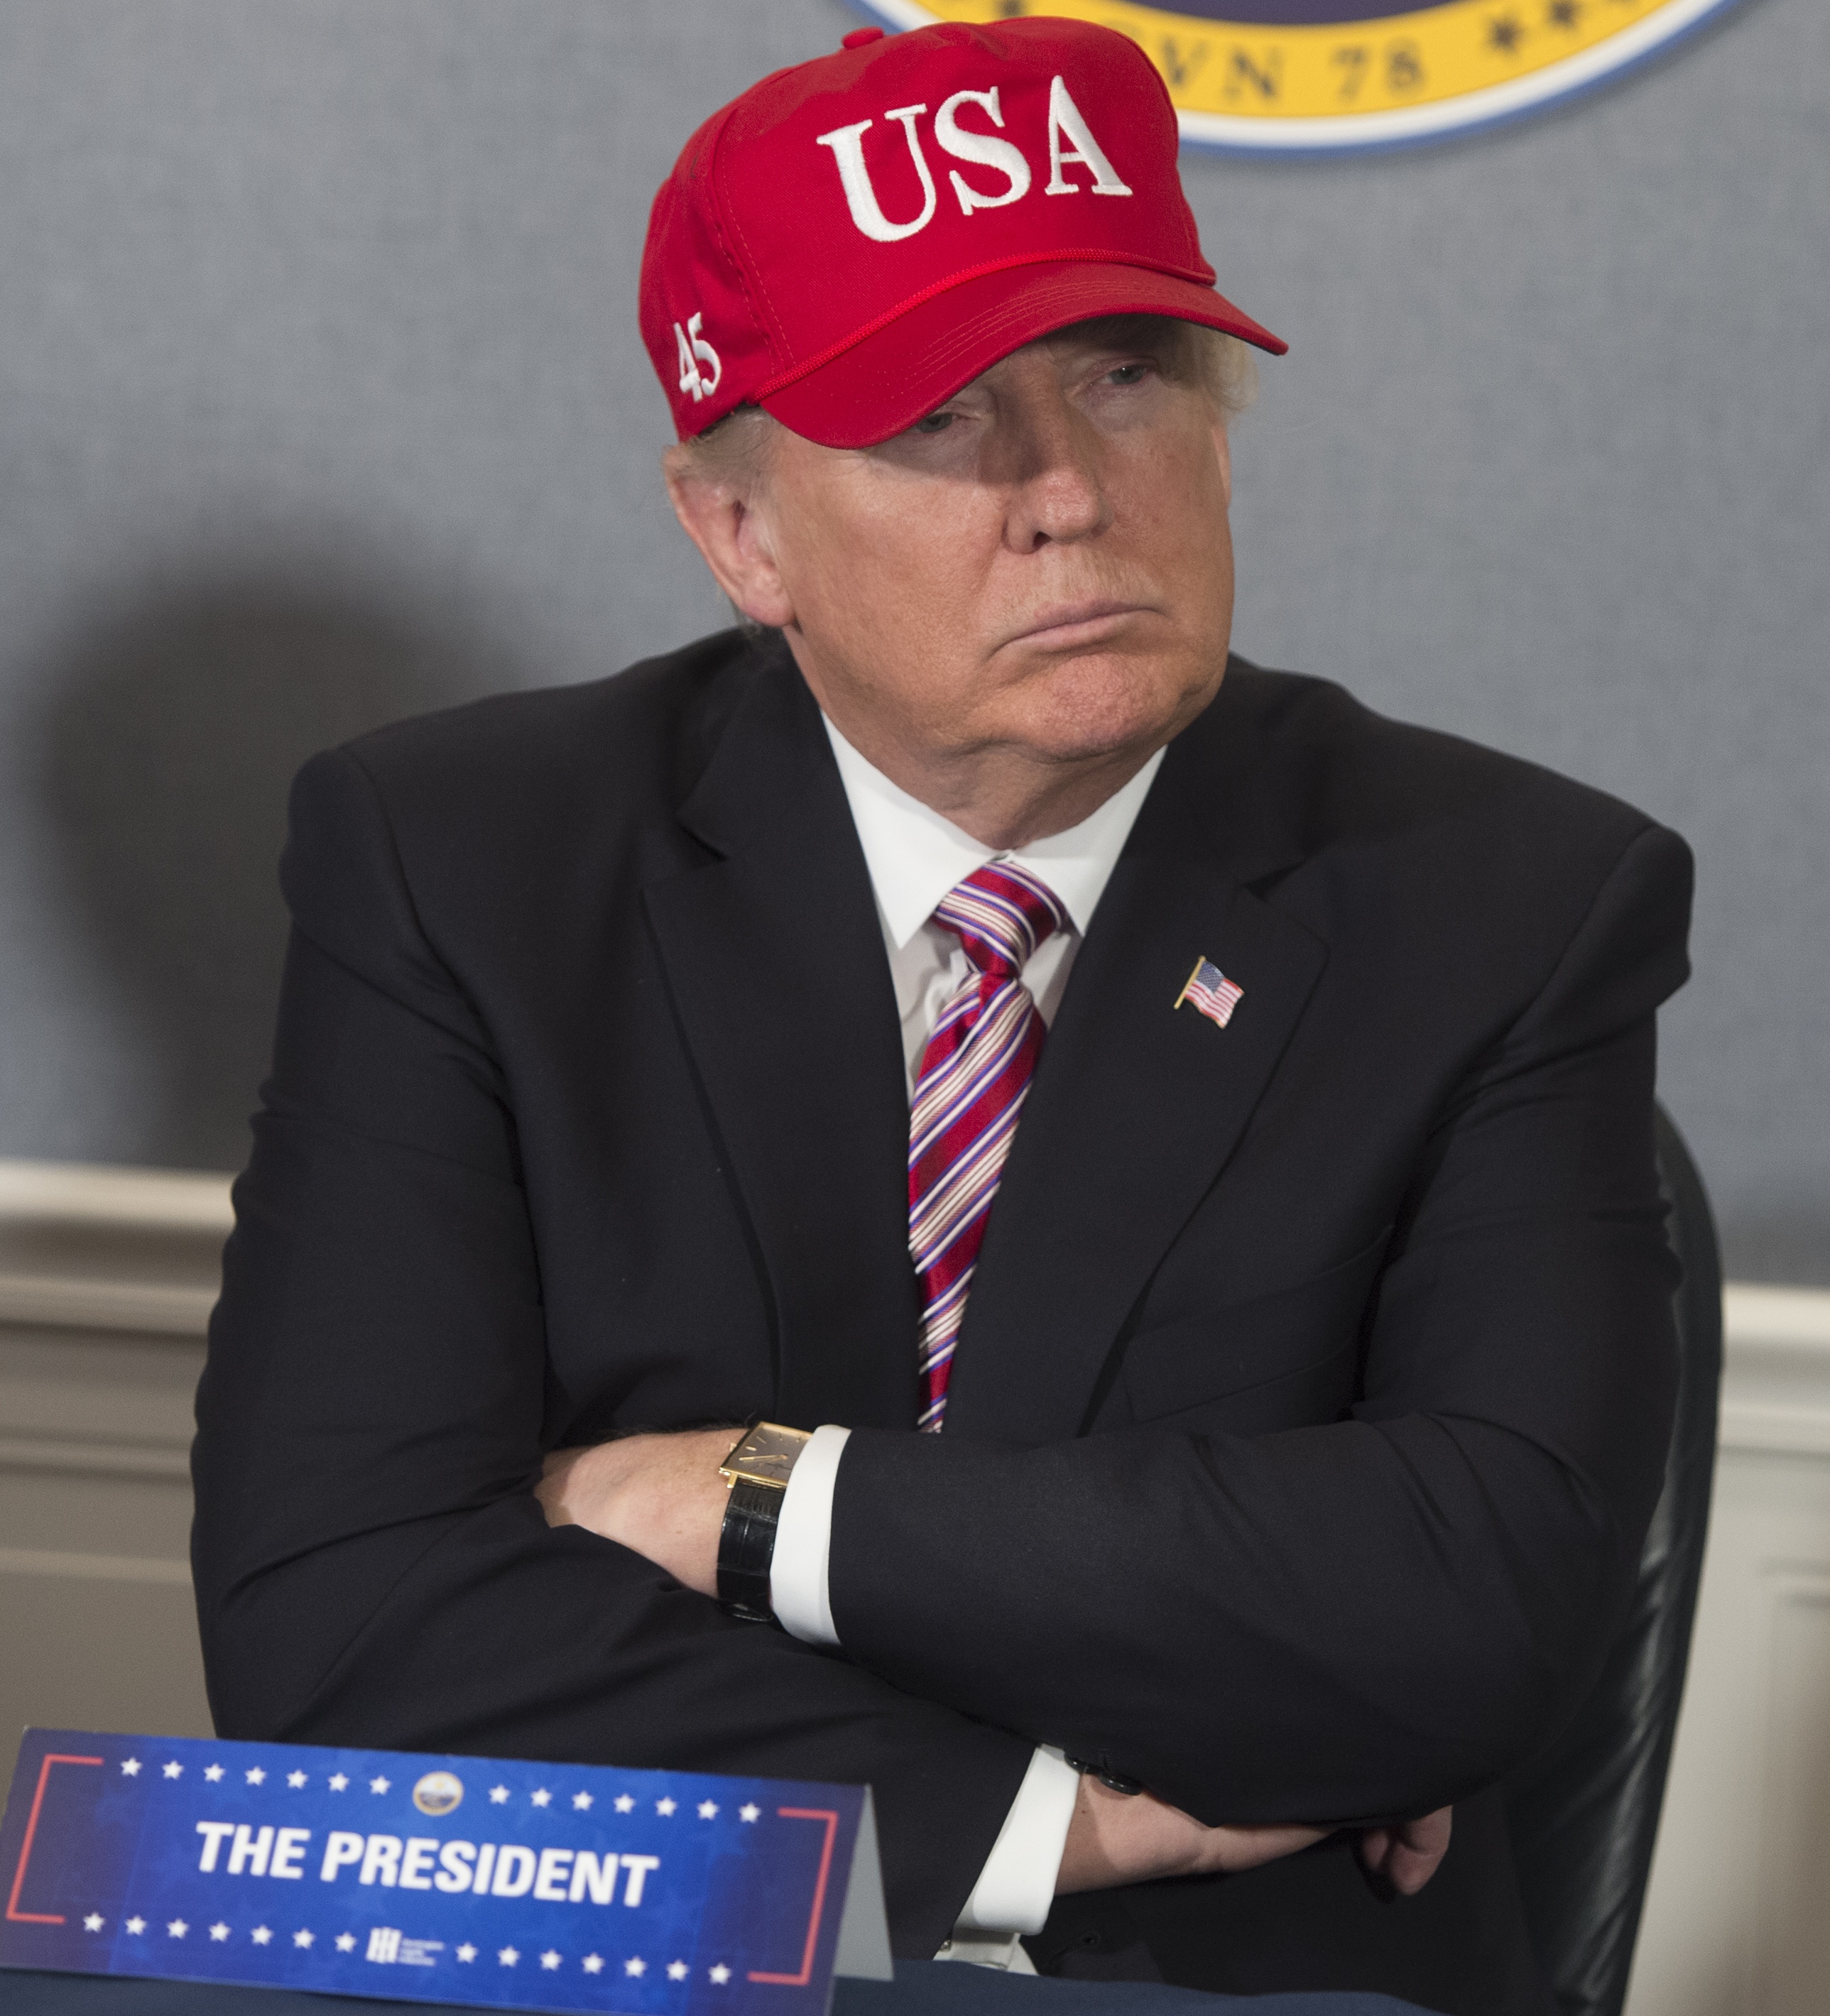 President Trump does not look happy.